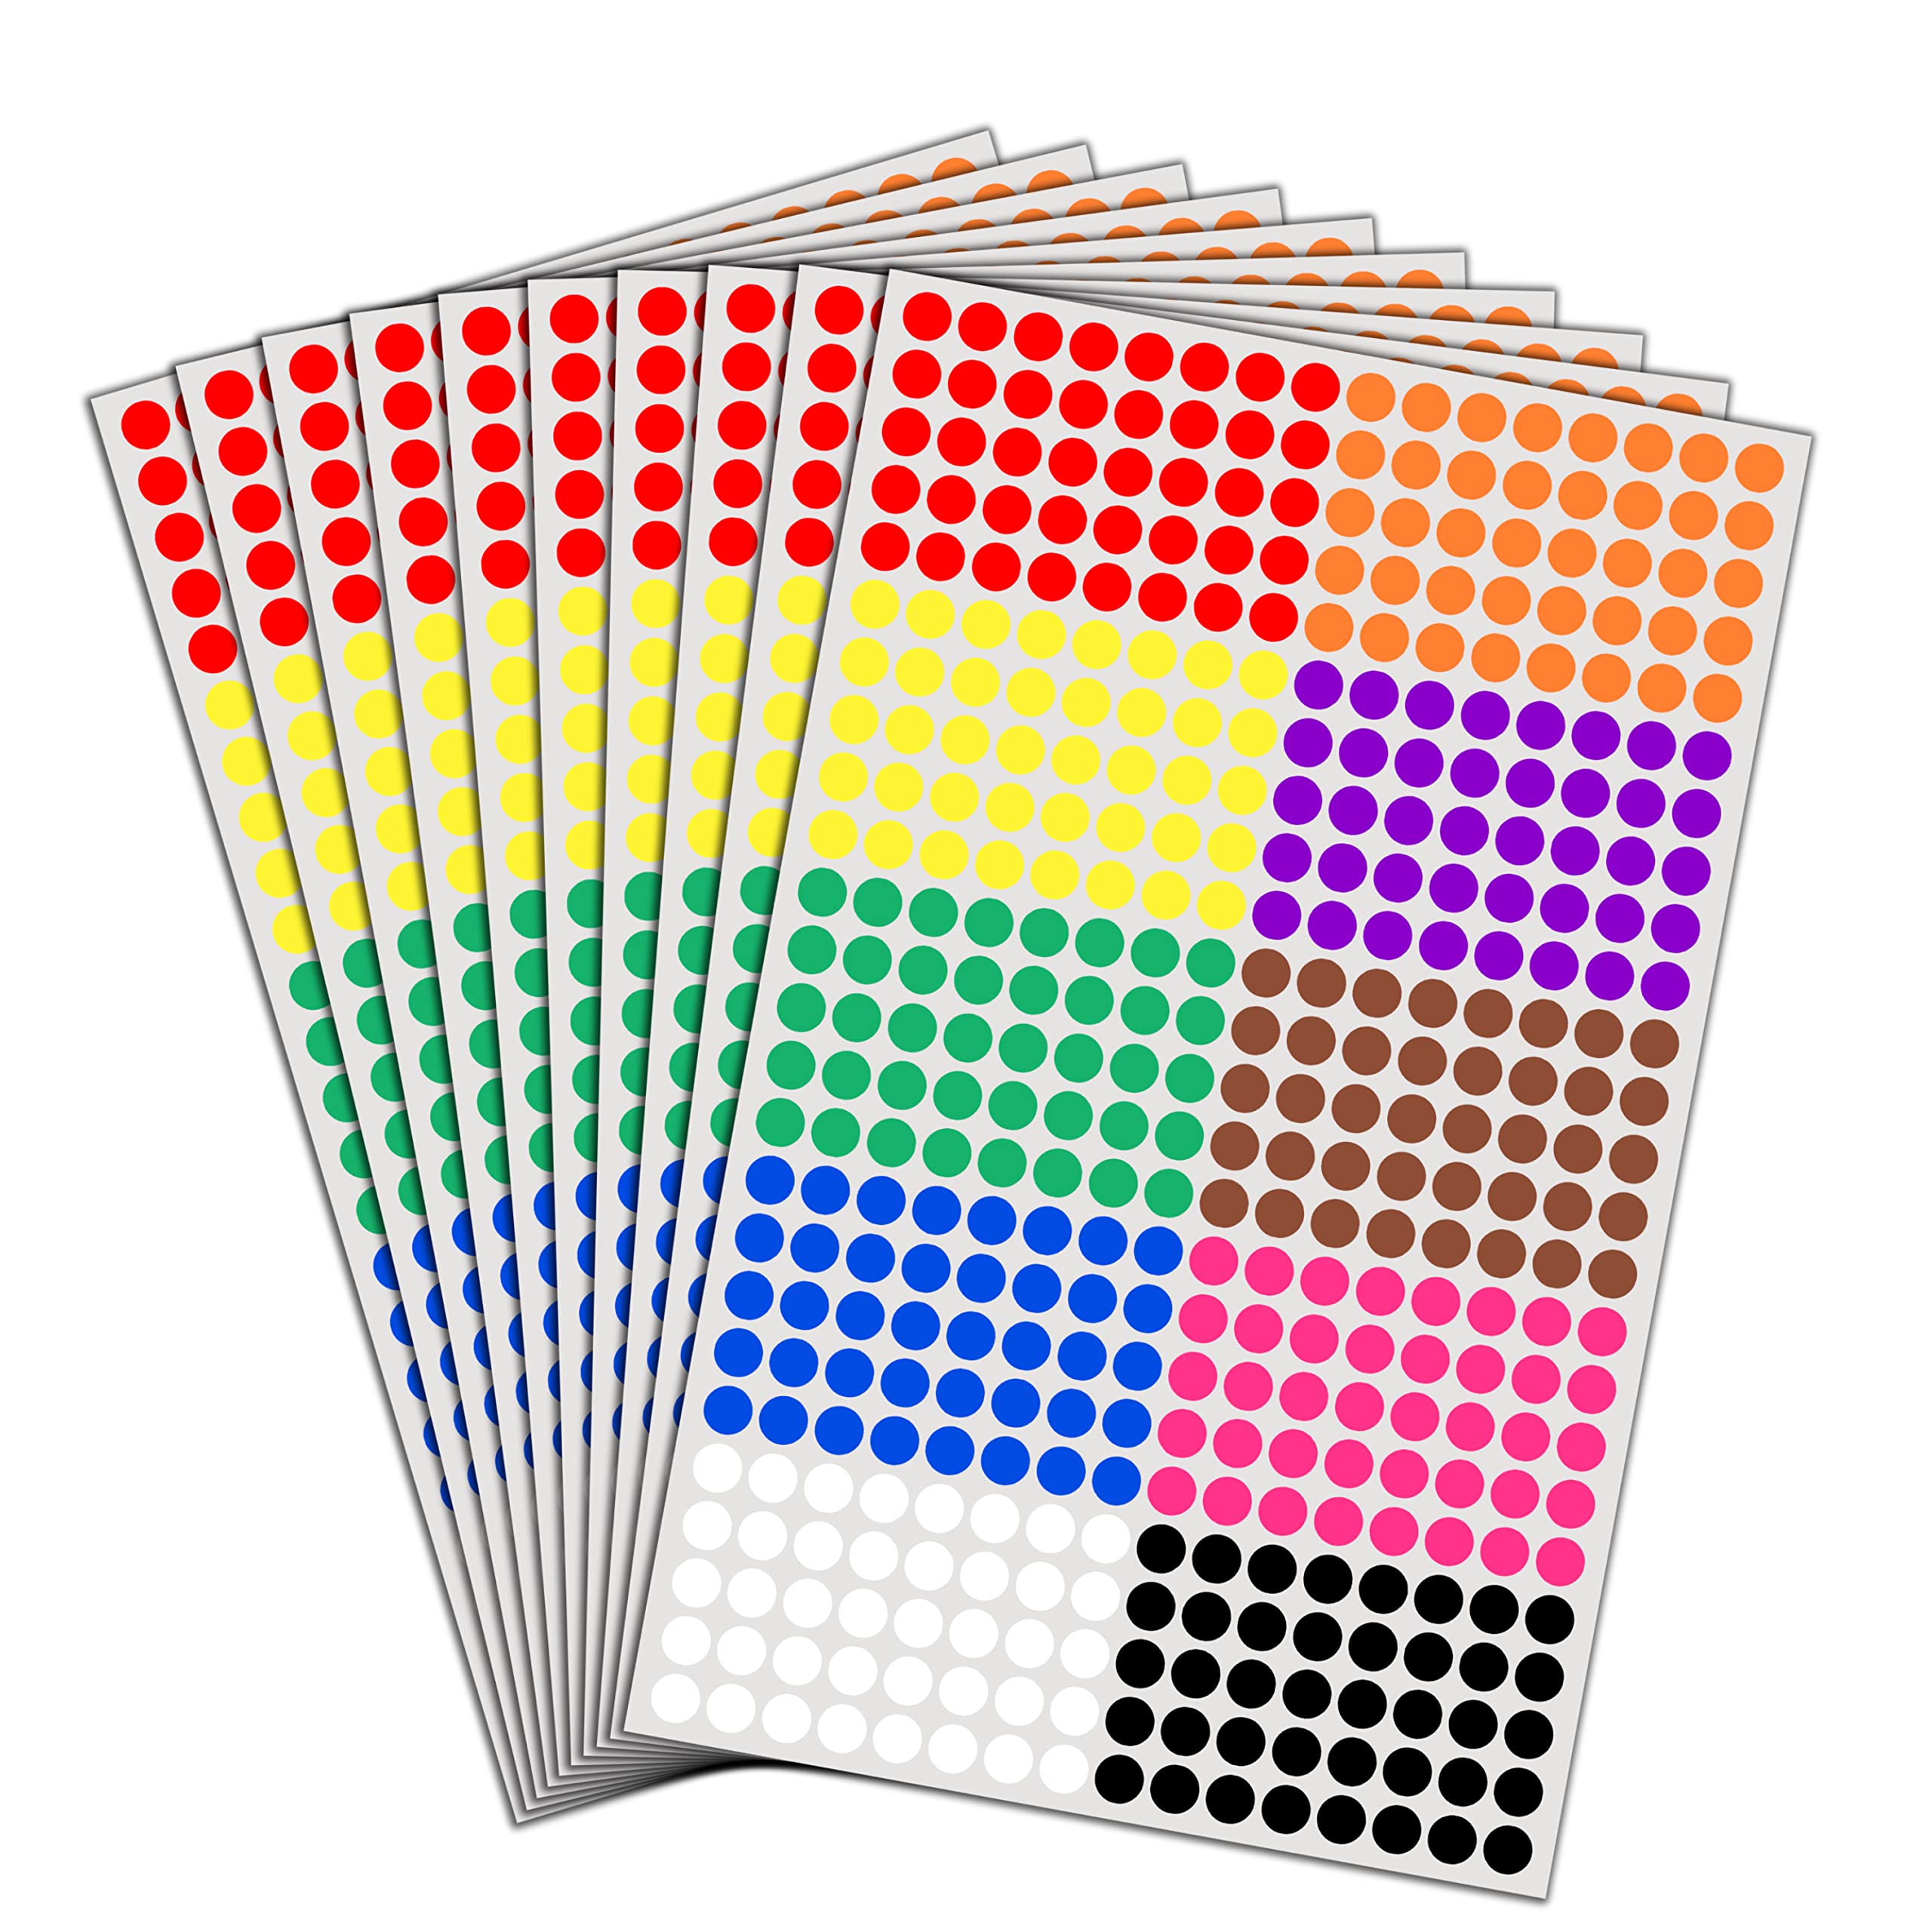 TownStix 8 6000 Pack, 1/4 Small Colored Dot Stickers Round Labels